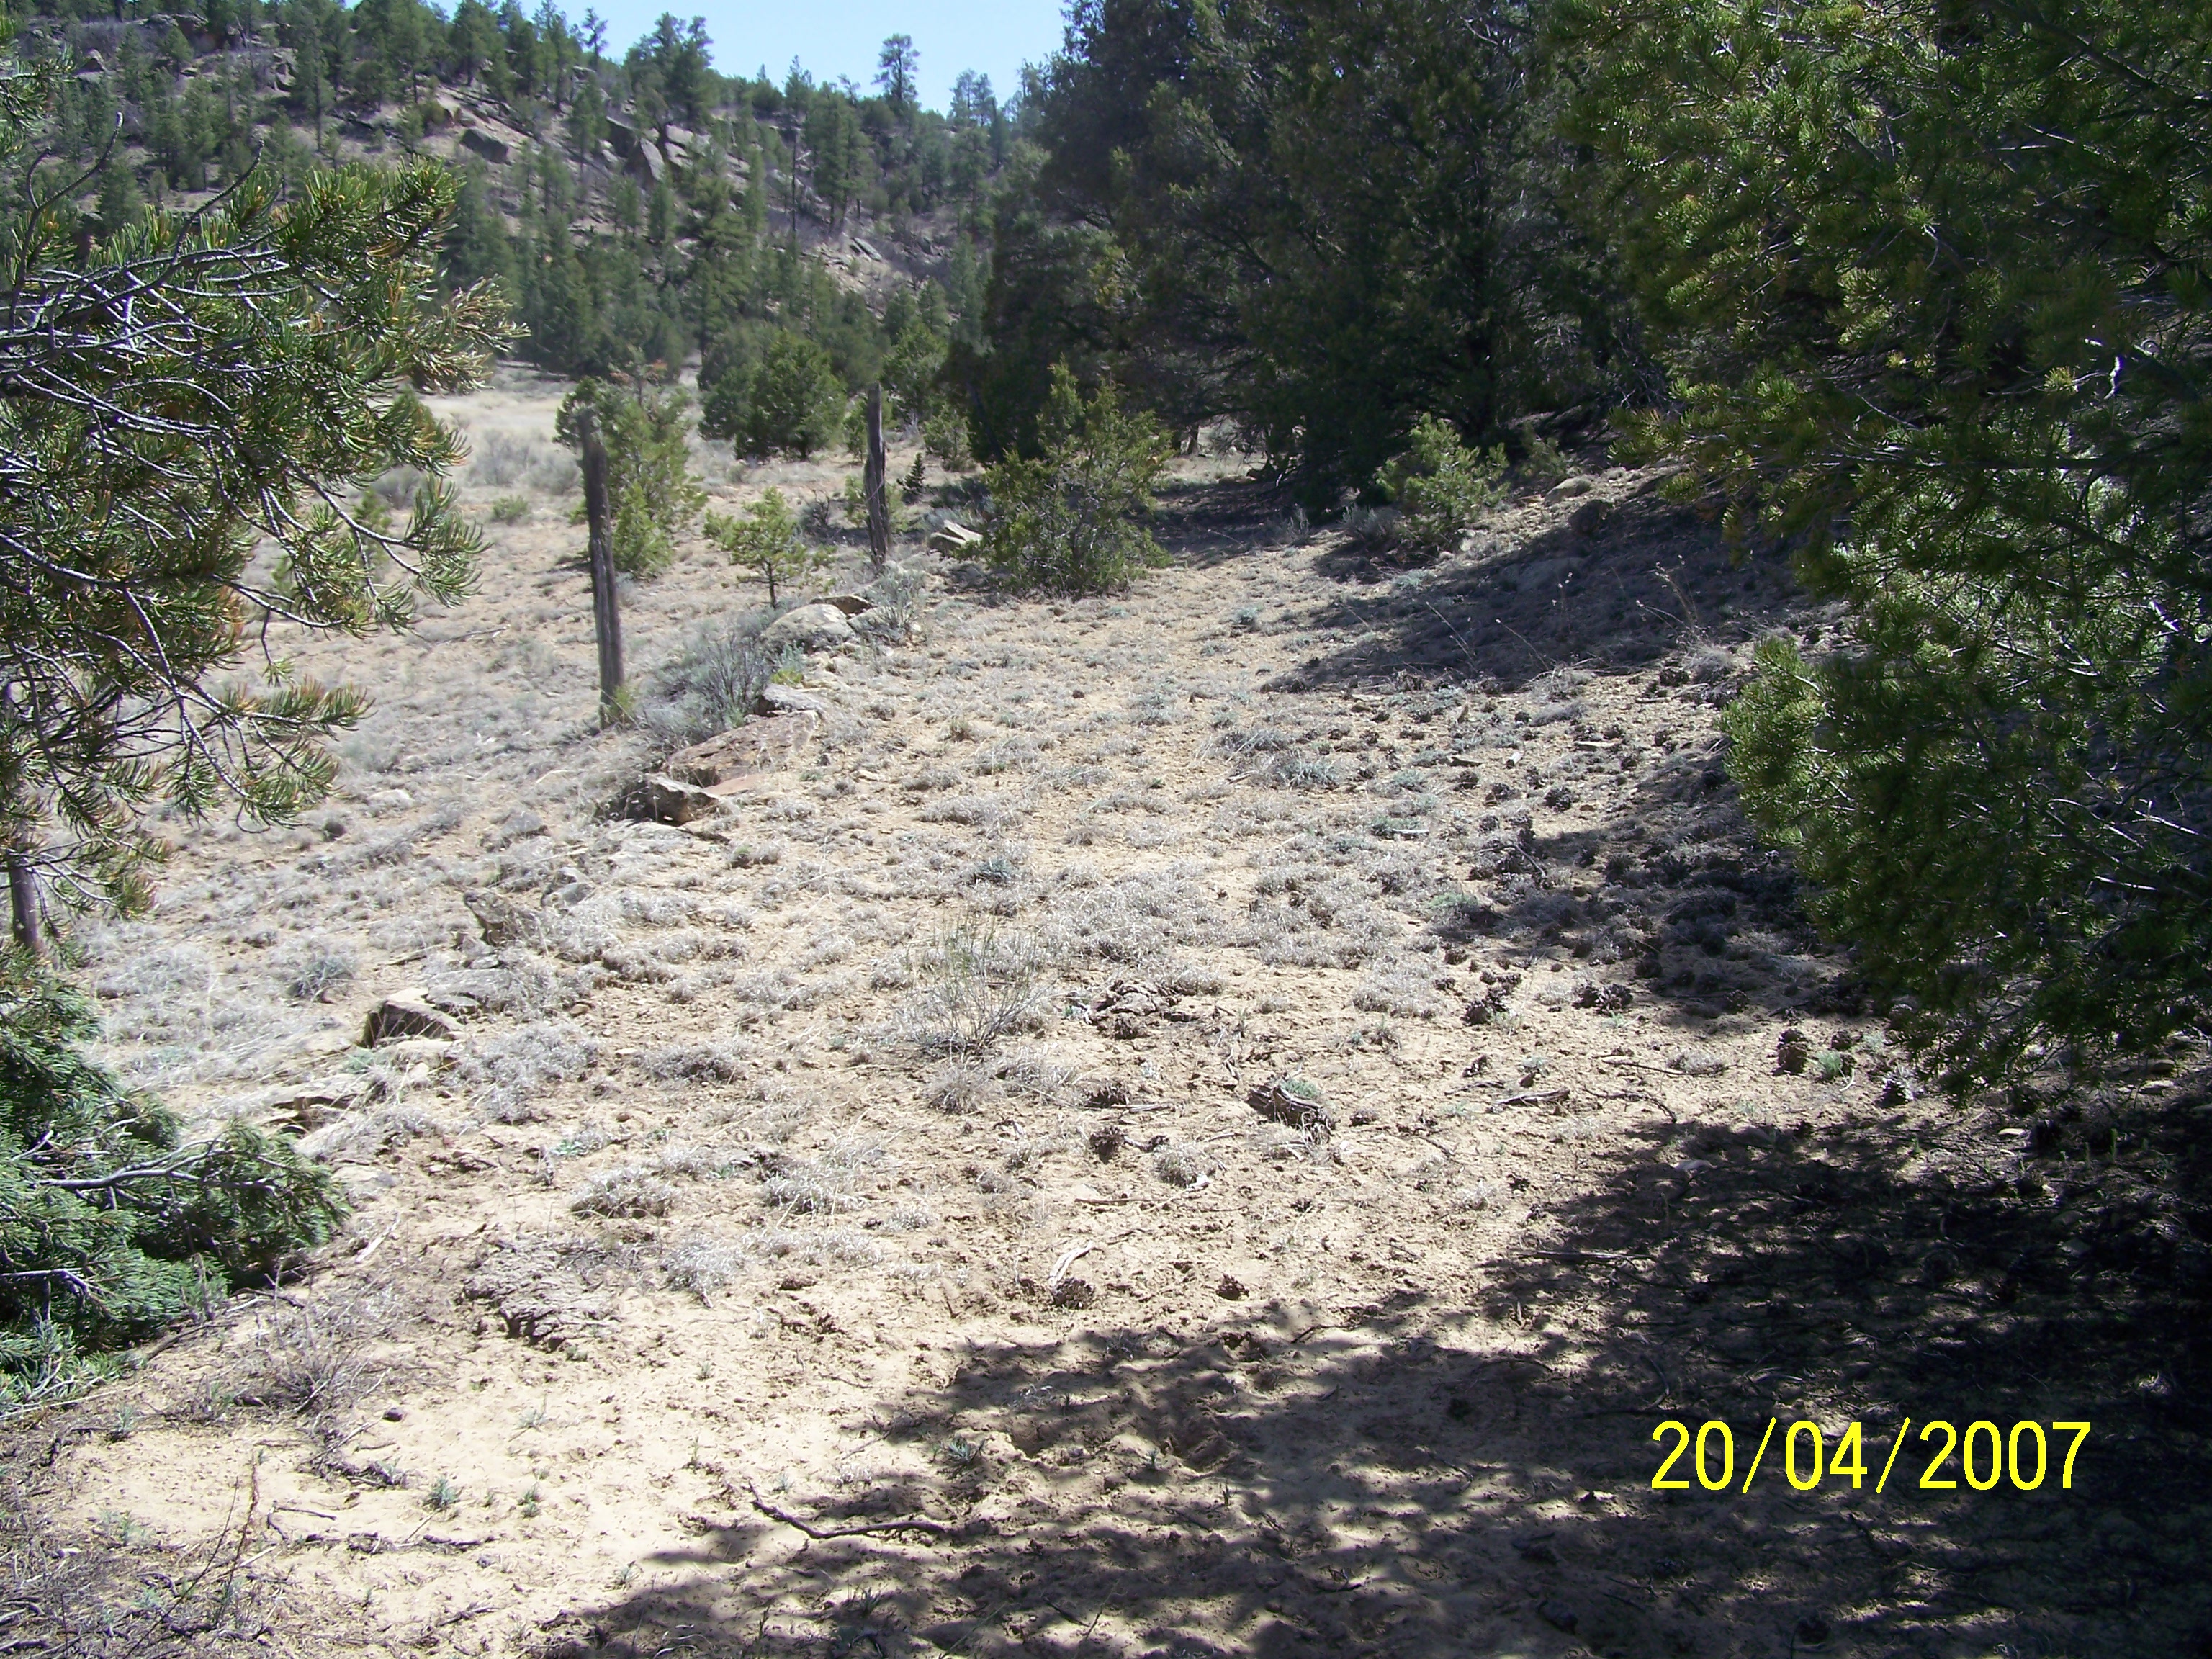 Feature 26 (arroyo road) looking south